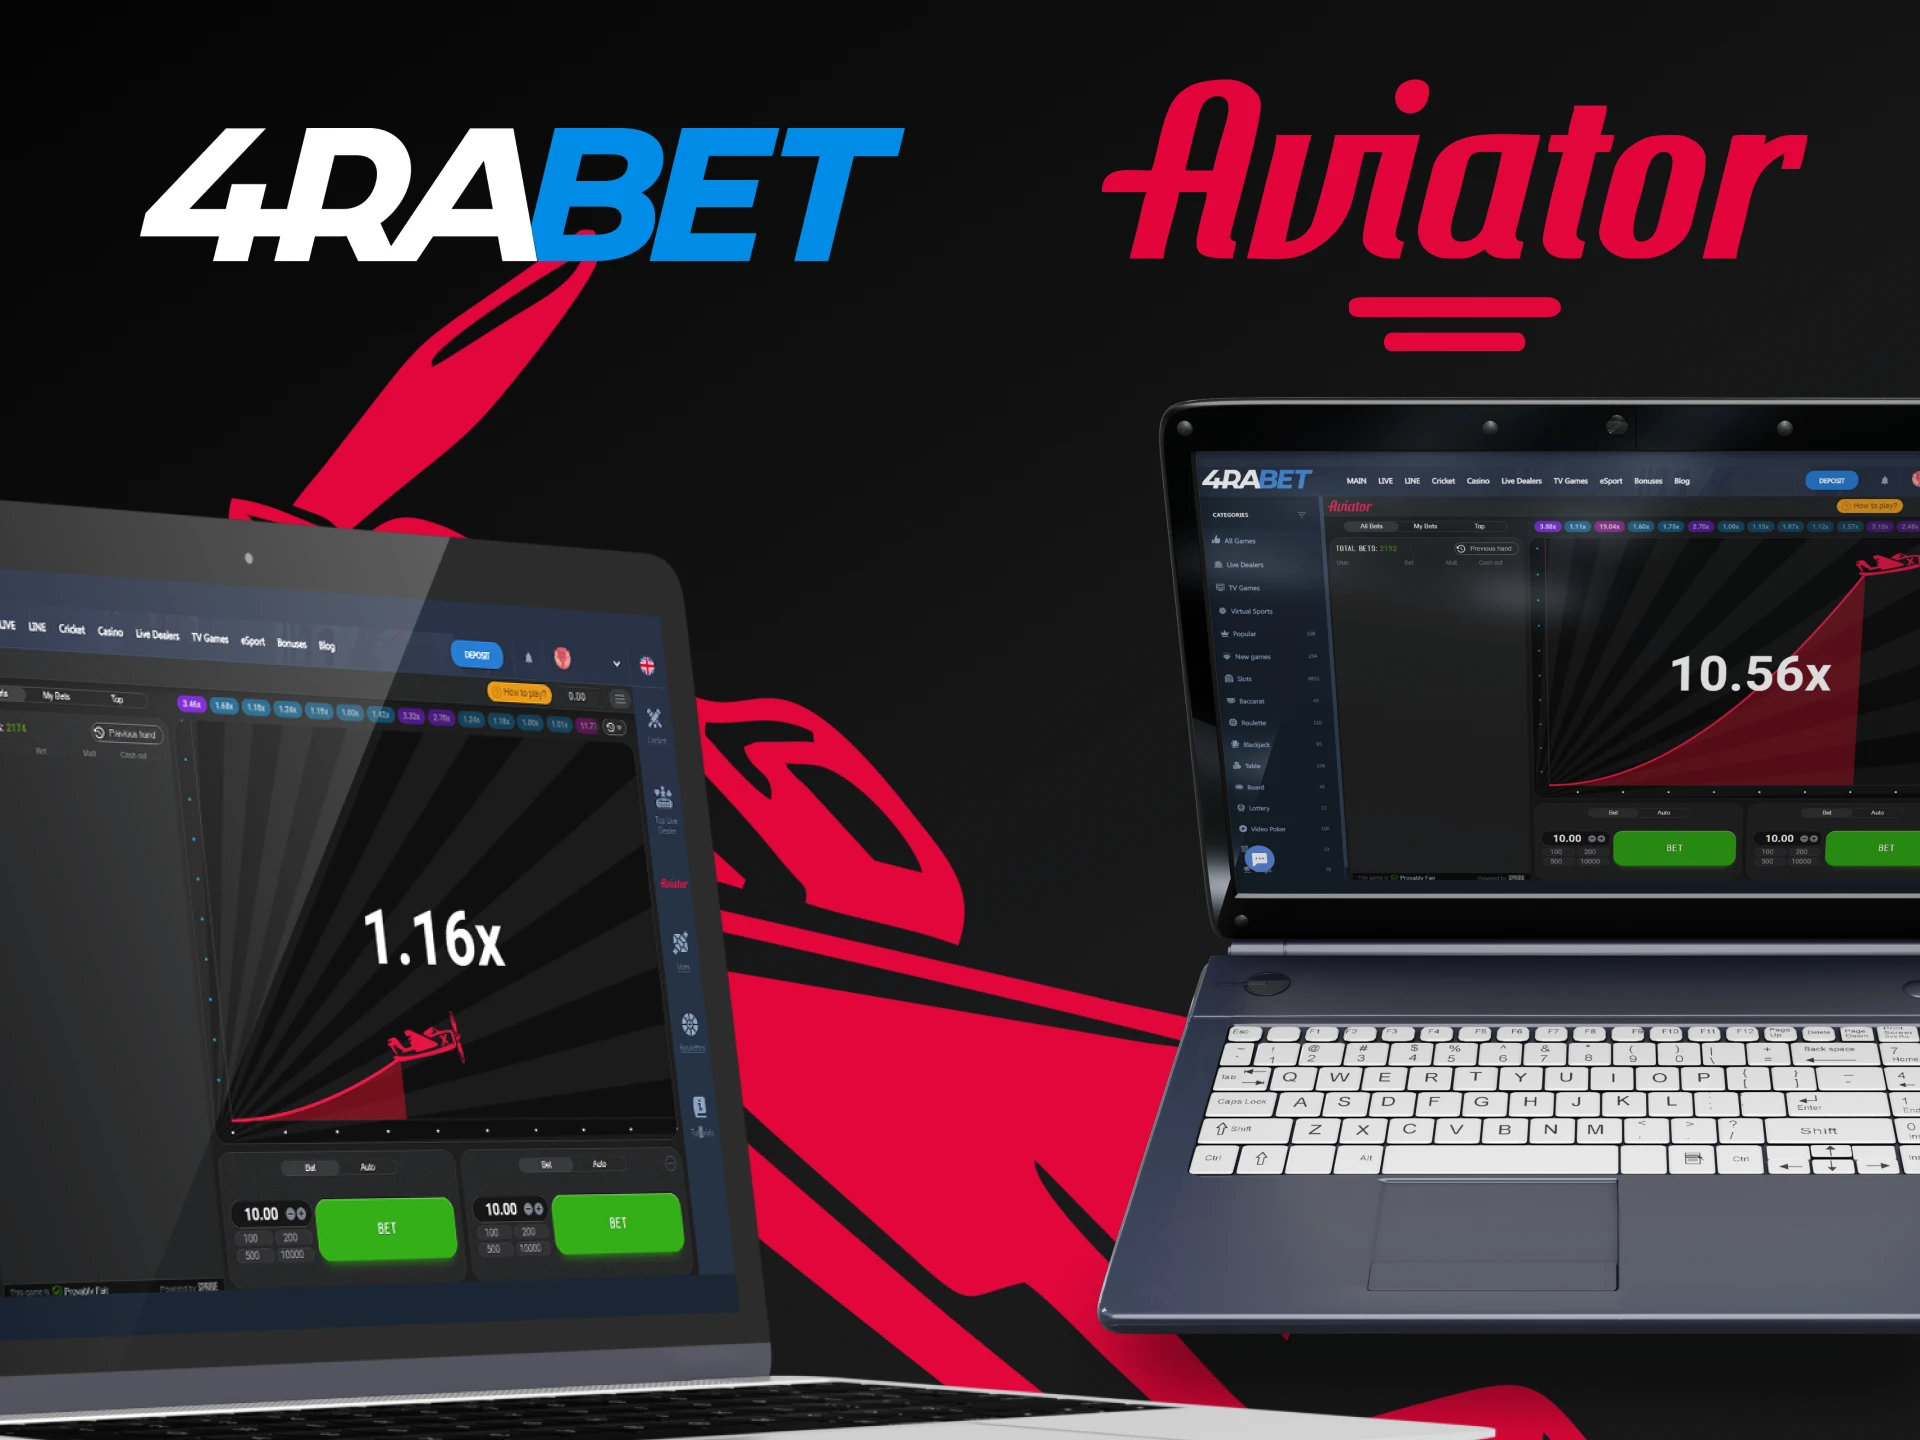 Play Aviator by 4rabet on any device.